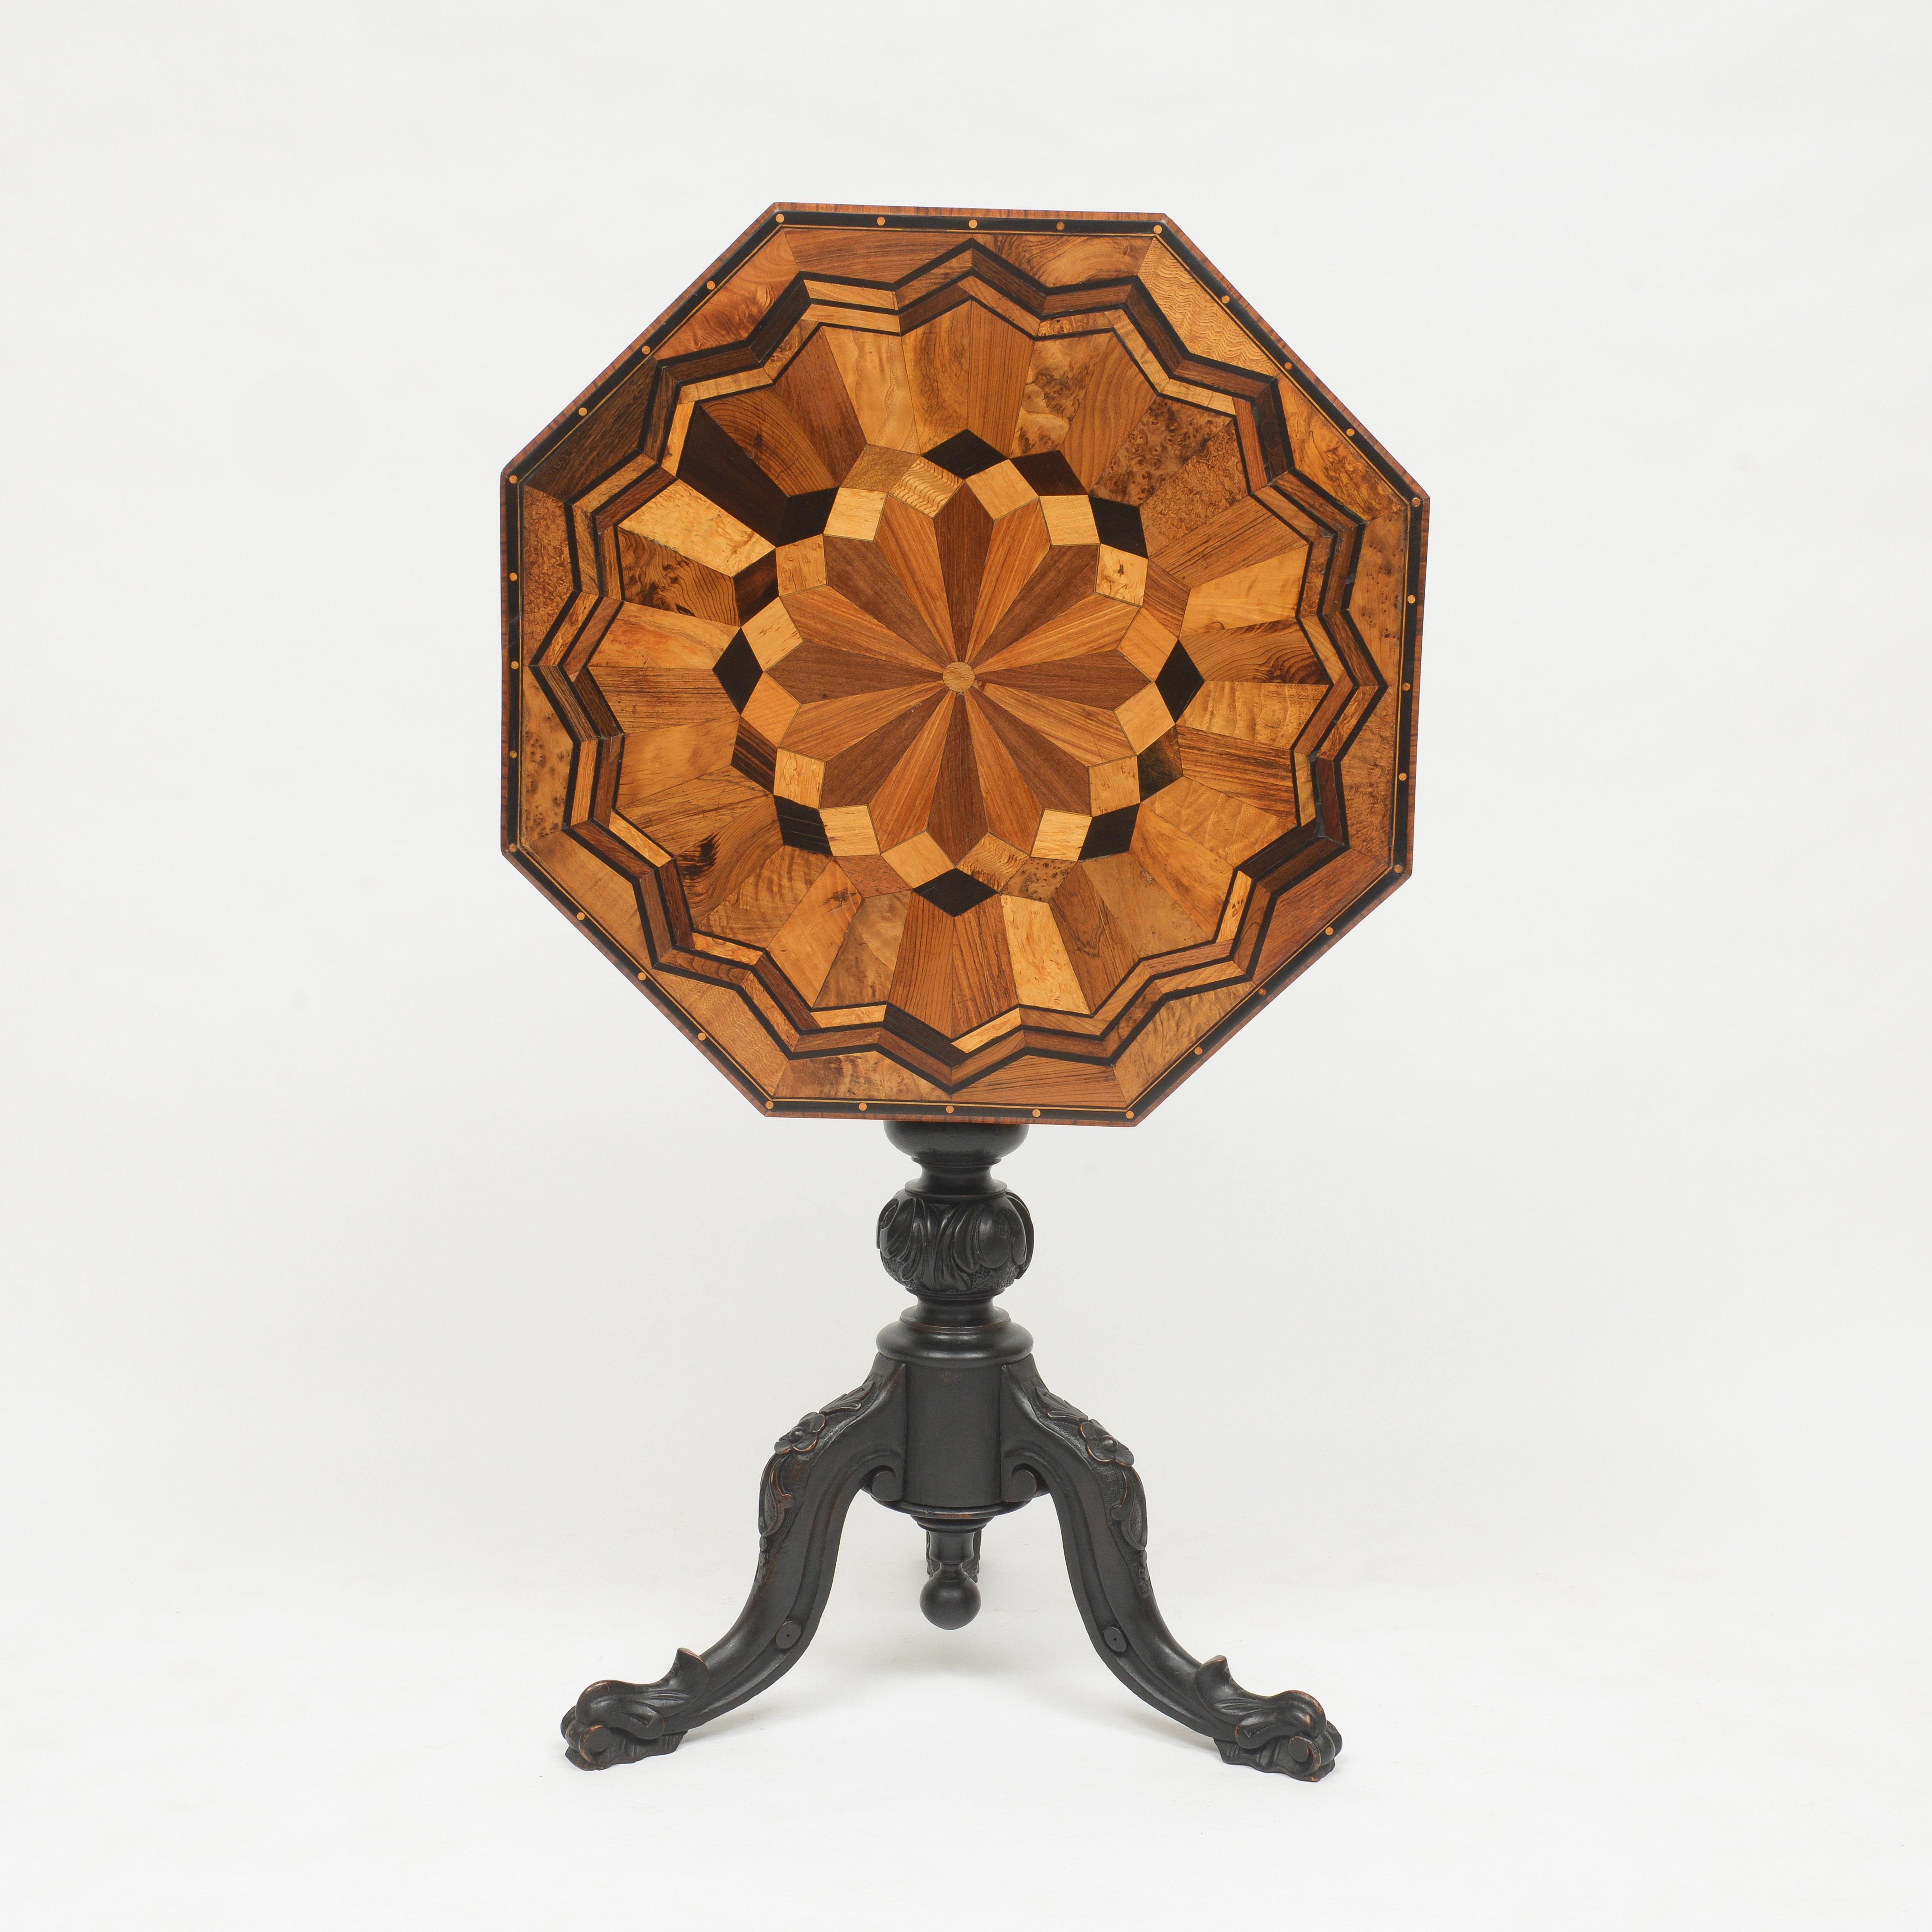 The octagonal table top is arranged in a parquetry design that is composed of many different veneer arranged in an elaborate patera pattern. The base is a series of turnings ending in three carved legs. Excellent condition